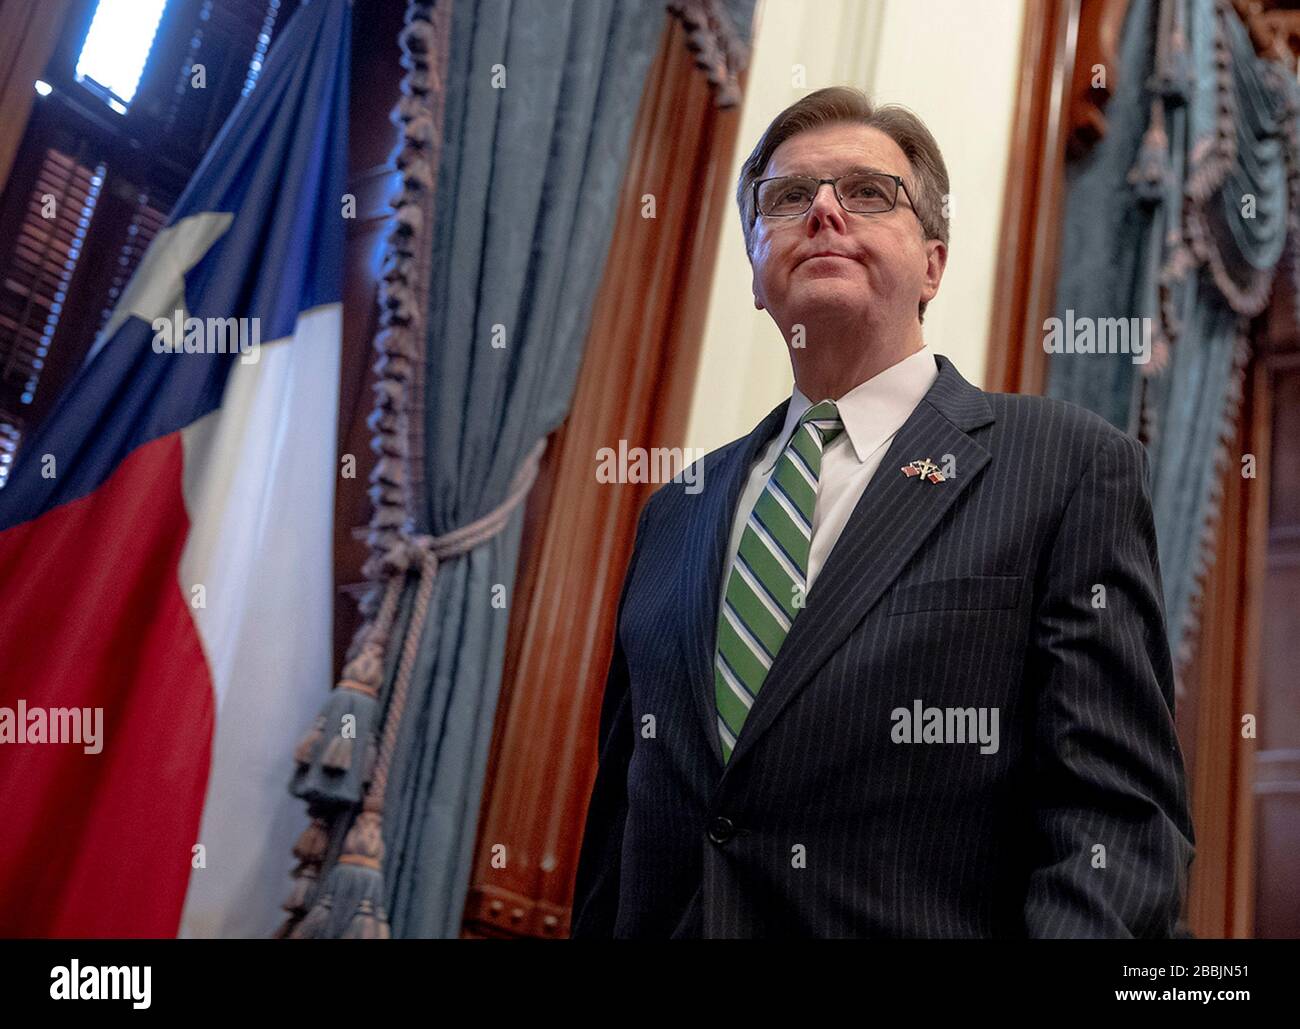 Austin, Texas, USA. 31st Mar, 2020. Texas Lt. Gov. Dan Patrick exits a press conference at the state Capitol about the state's response to the coronavirus. Credit: Nick Wagner/AAS/POOL/ZUMA Wire/Alamy Live News Stock Photo